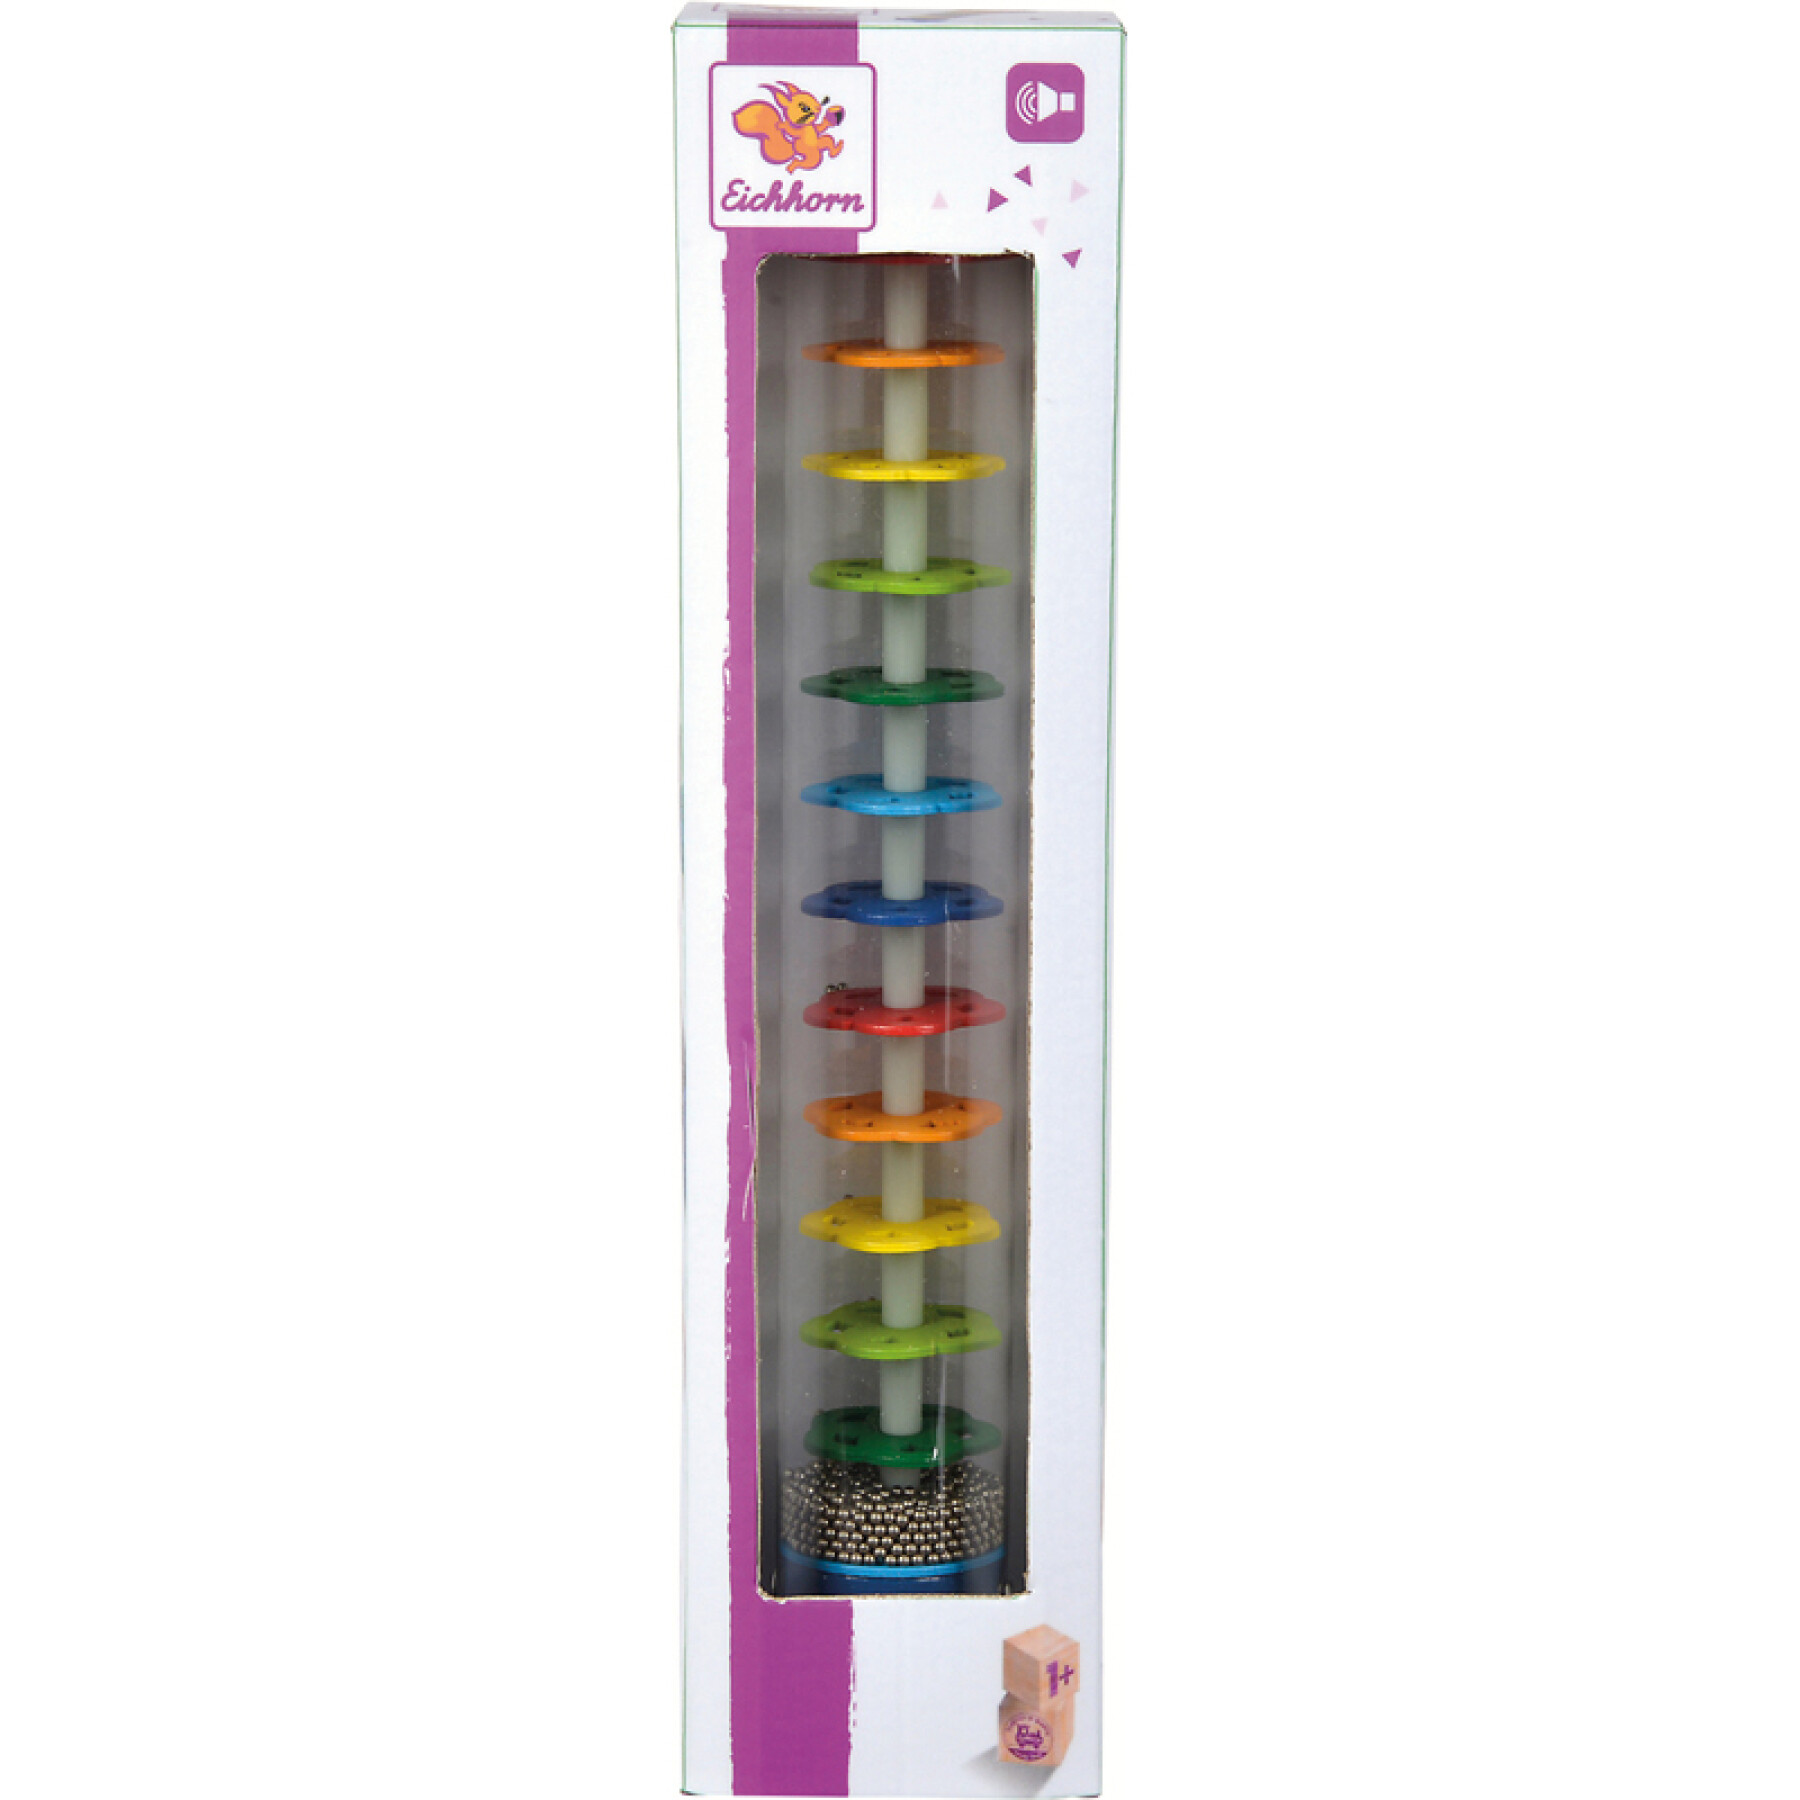 Early-learning games rain stick Smoby